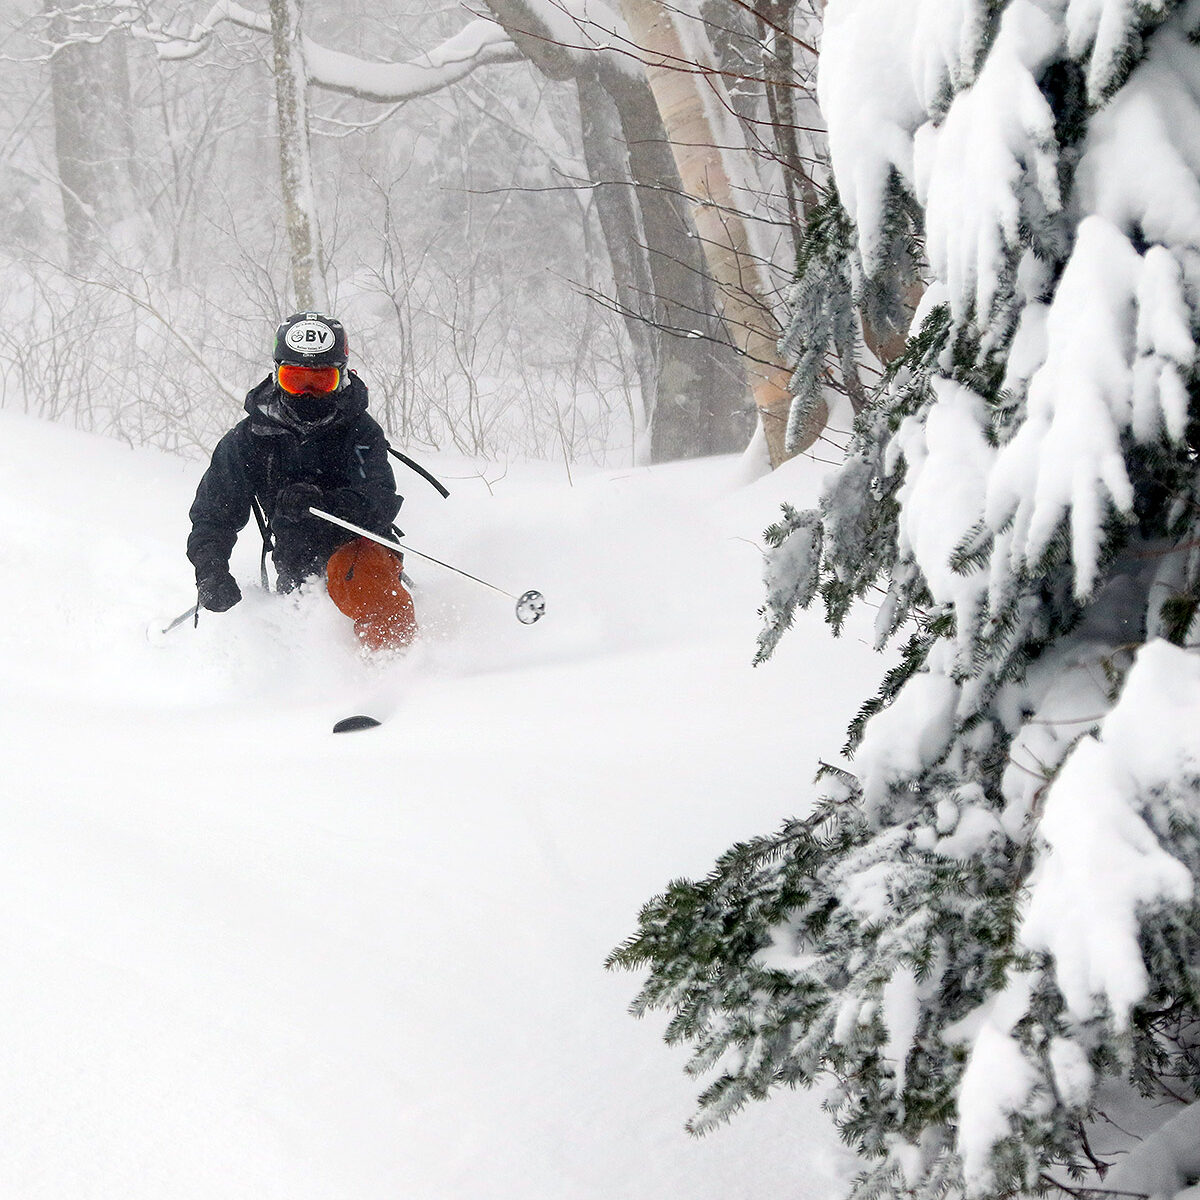 An image of Ty skiing fresh powder on from Winter Storm Diaz on the Bolton Outlaw Trail at Bolton Valley Ski Resort in Vermont